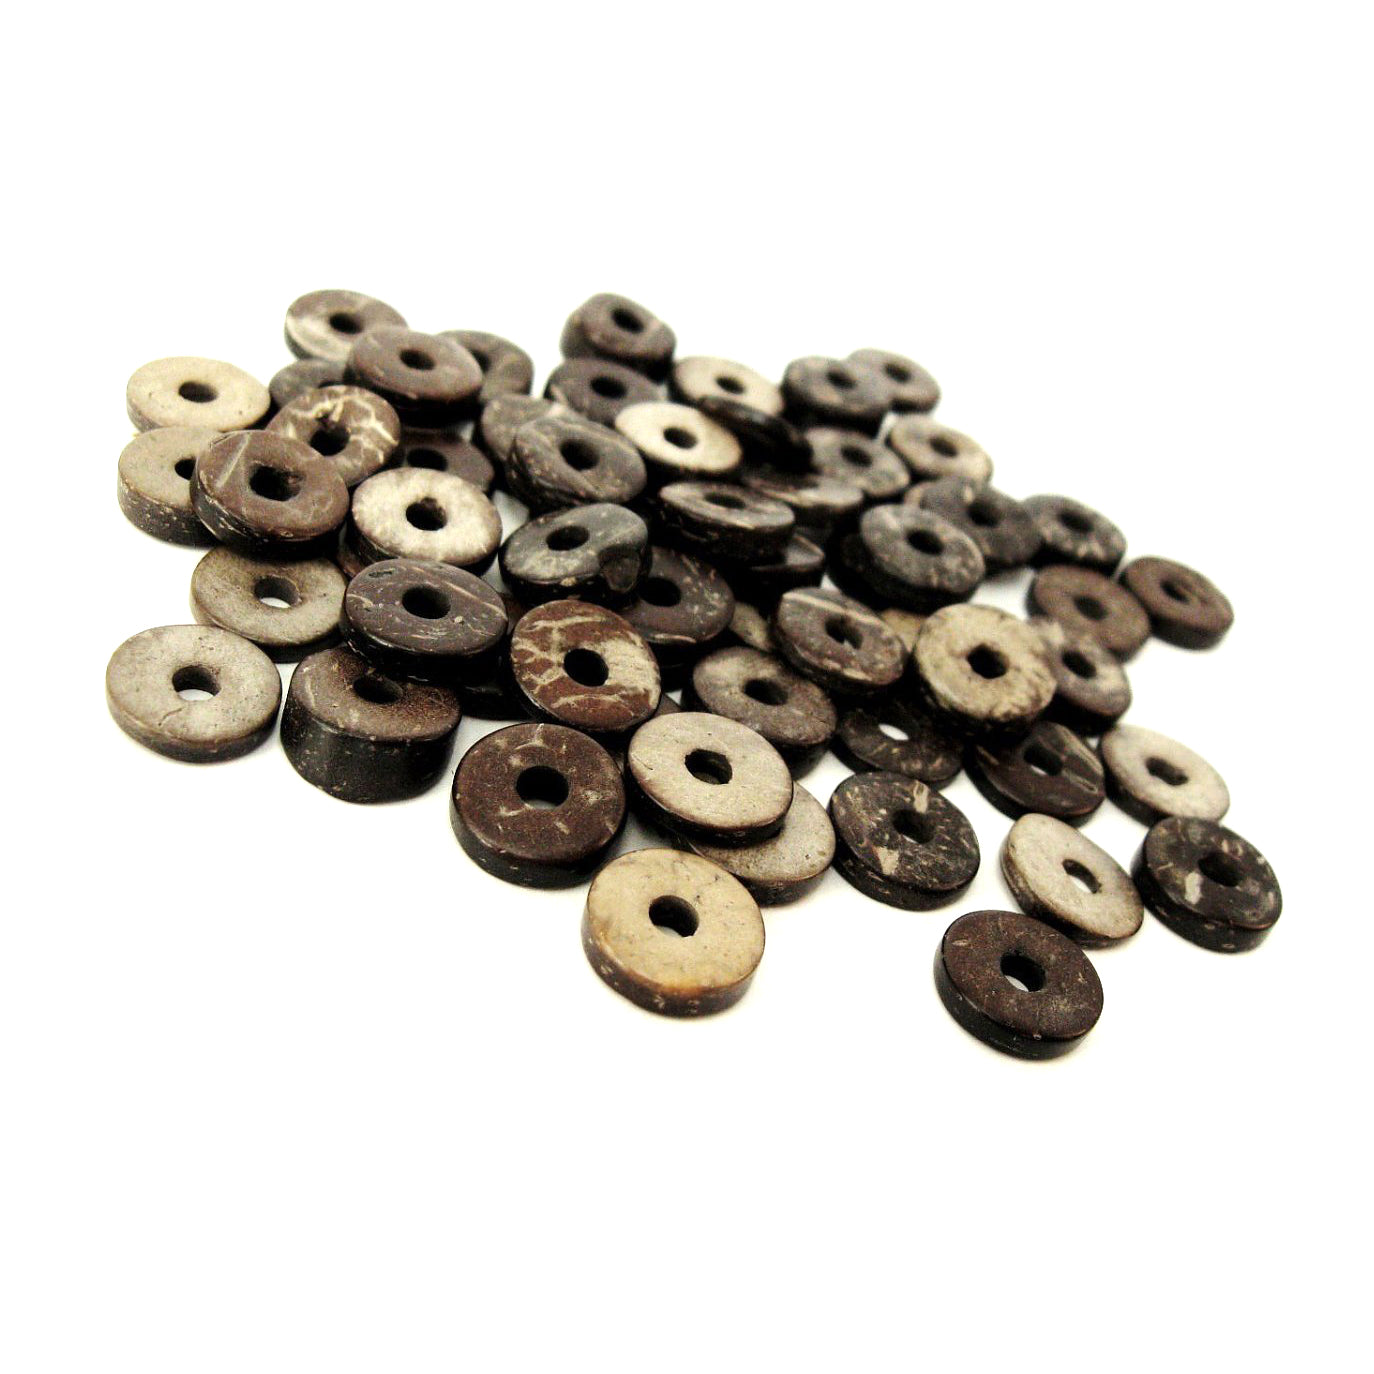 50 Wood CocoNut Shell Beads - Eco Friendly Donuts Rondelle Disk Beads 12mm